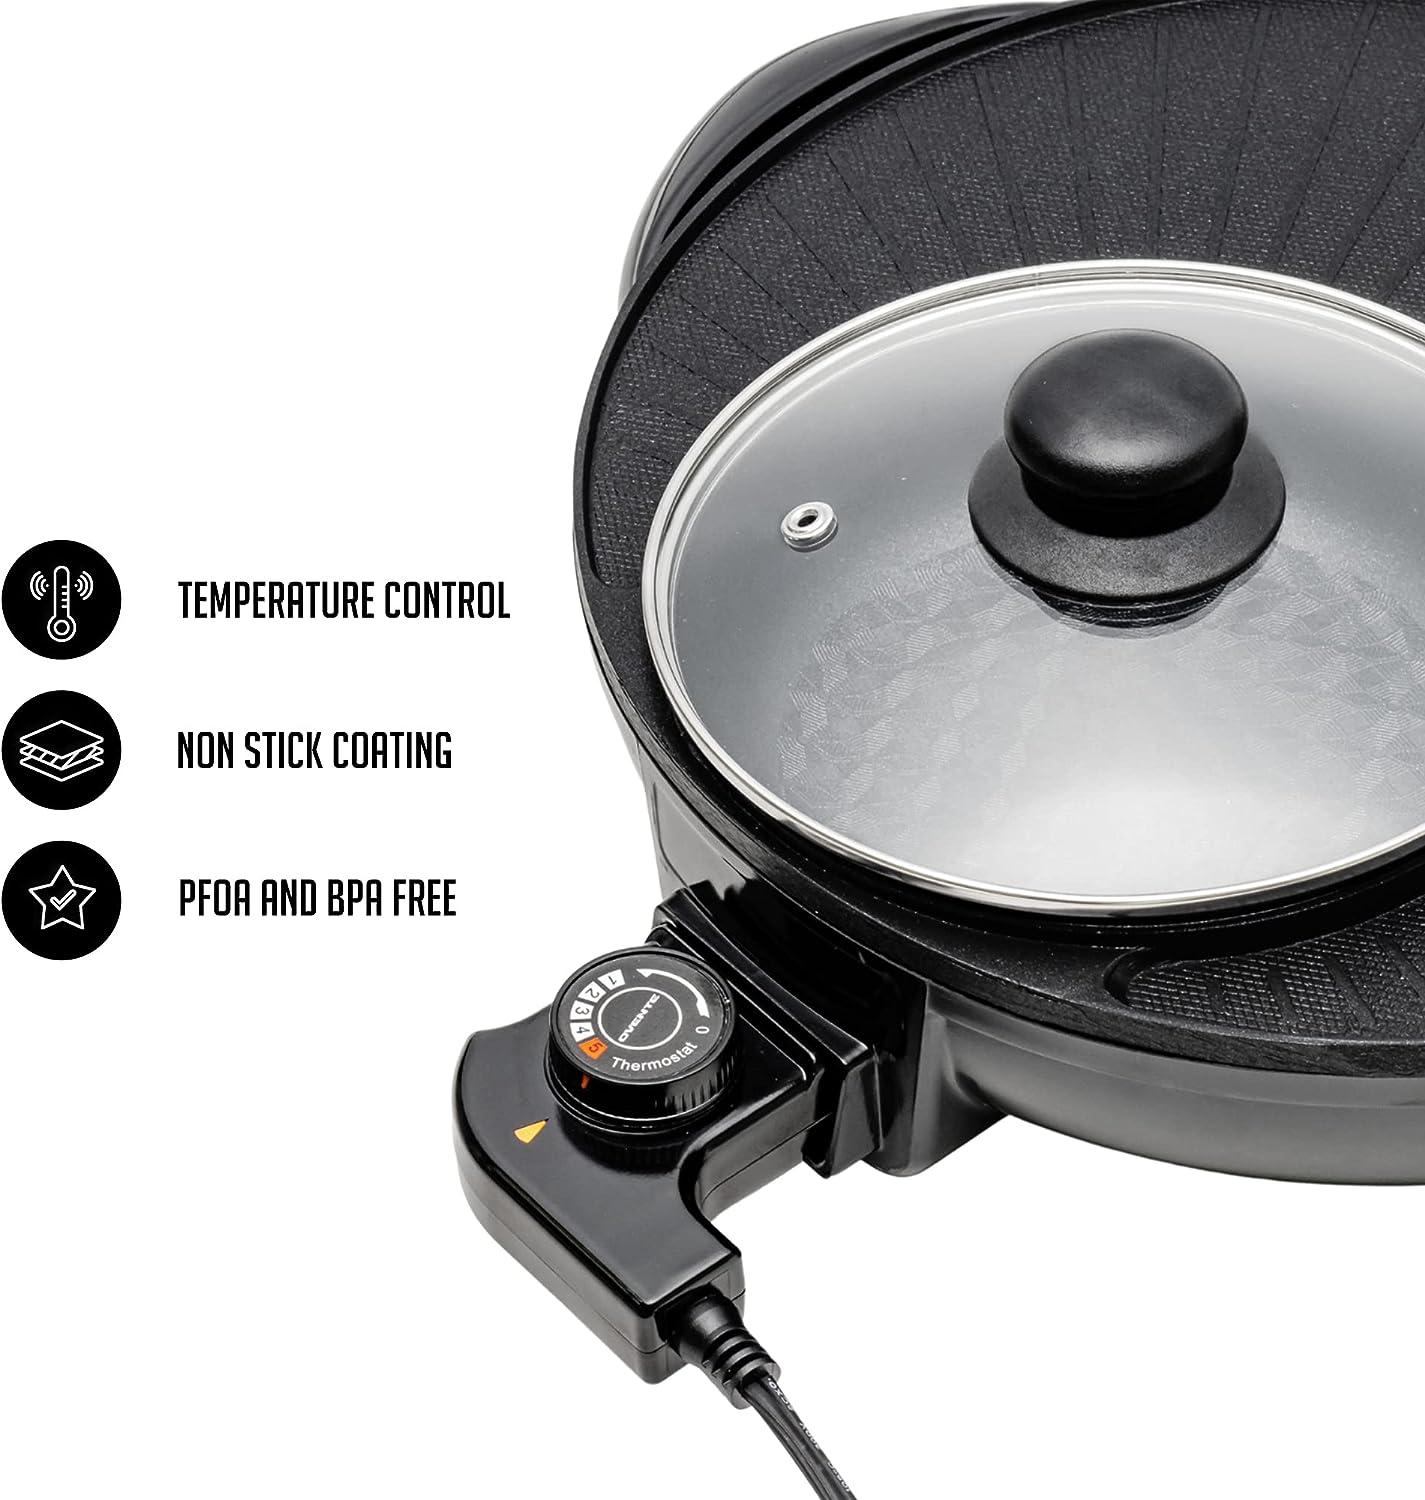 Ovente Electric Skillet 13 Inch with Non Stick Aluminum Coating